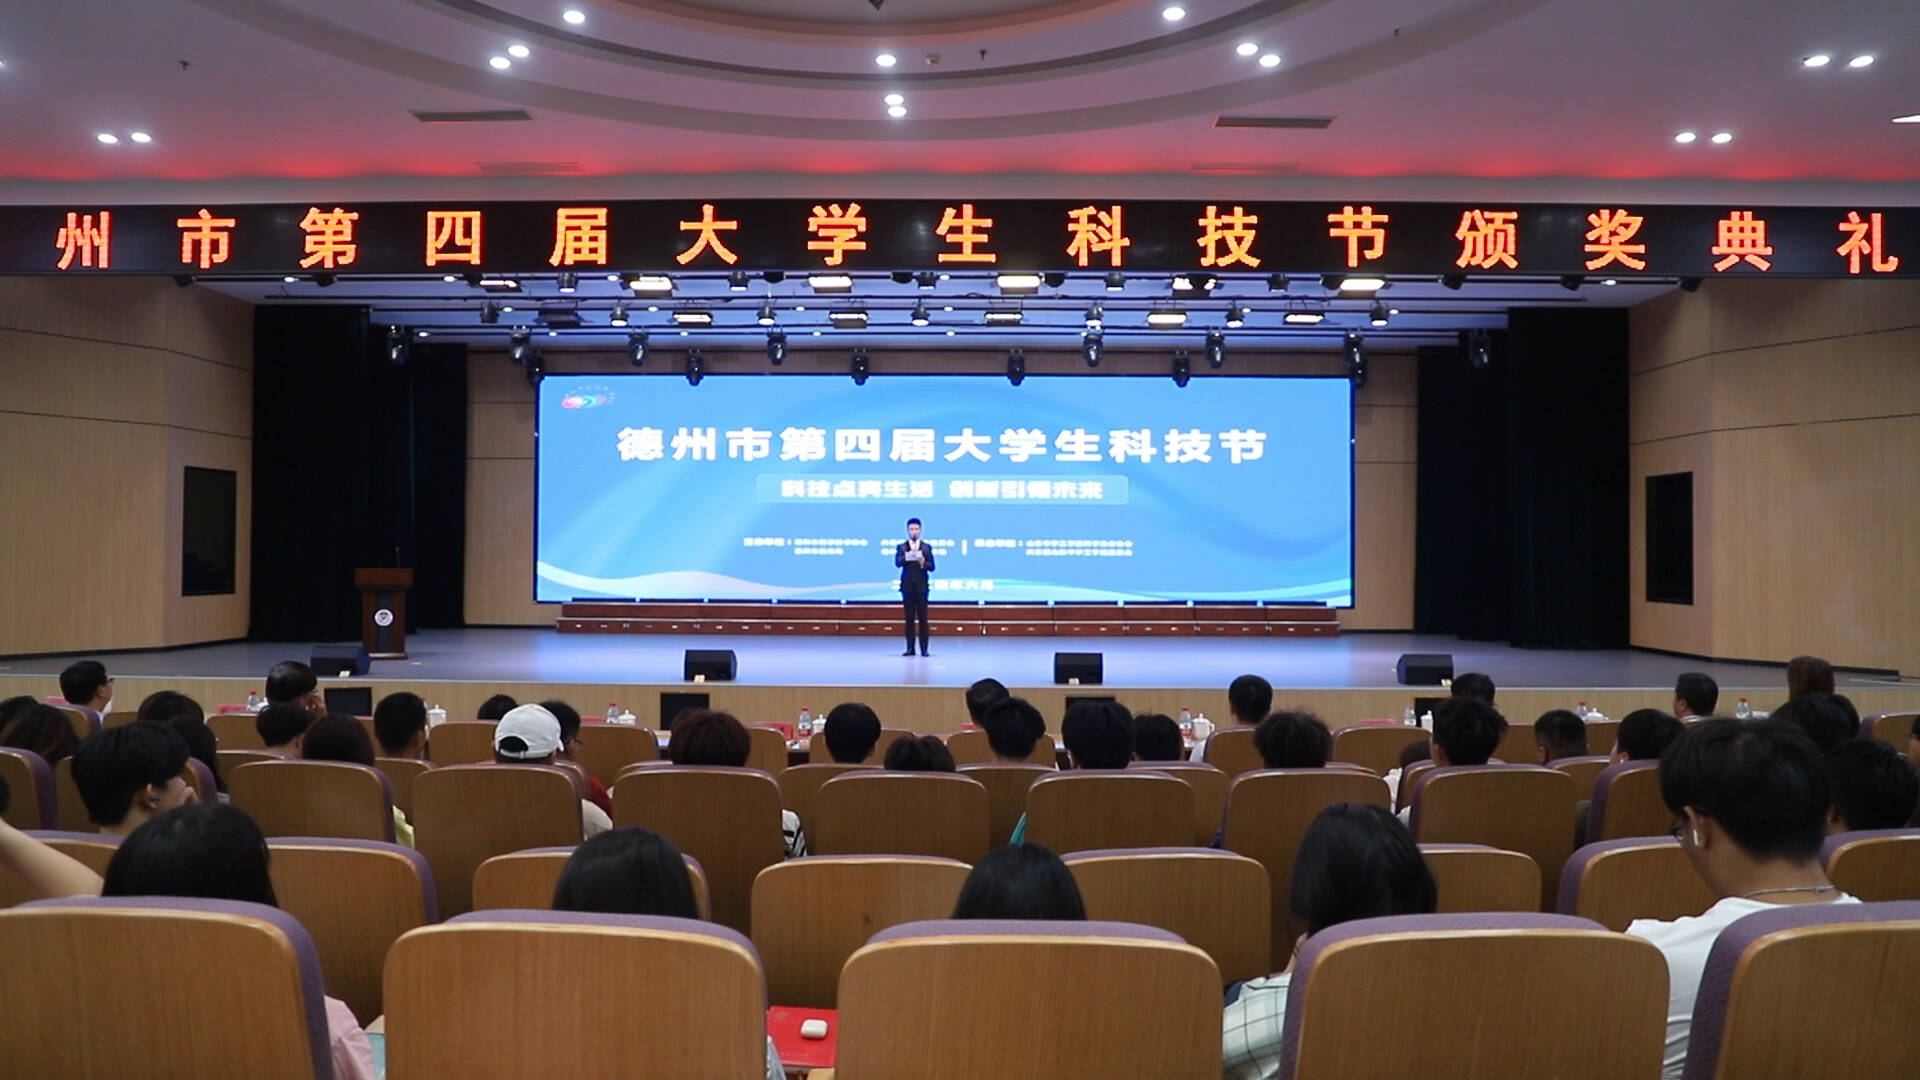  The 4th Dezhou University Student Science and Technology Festival Award Ceremony and Excellent Works Exhibition Held